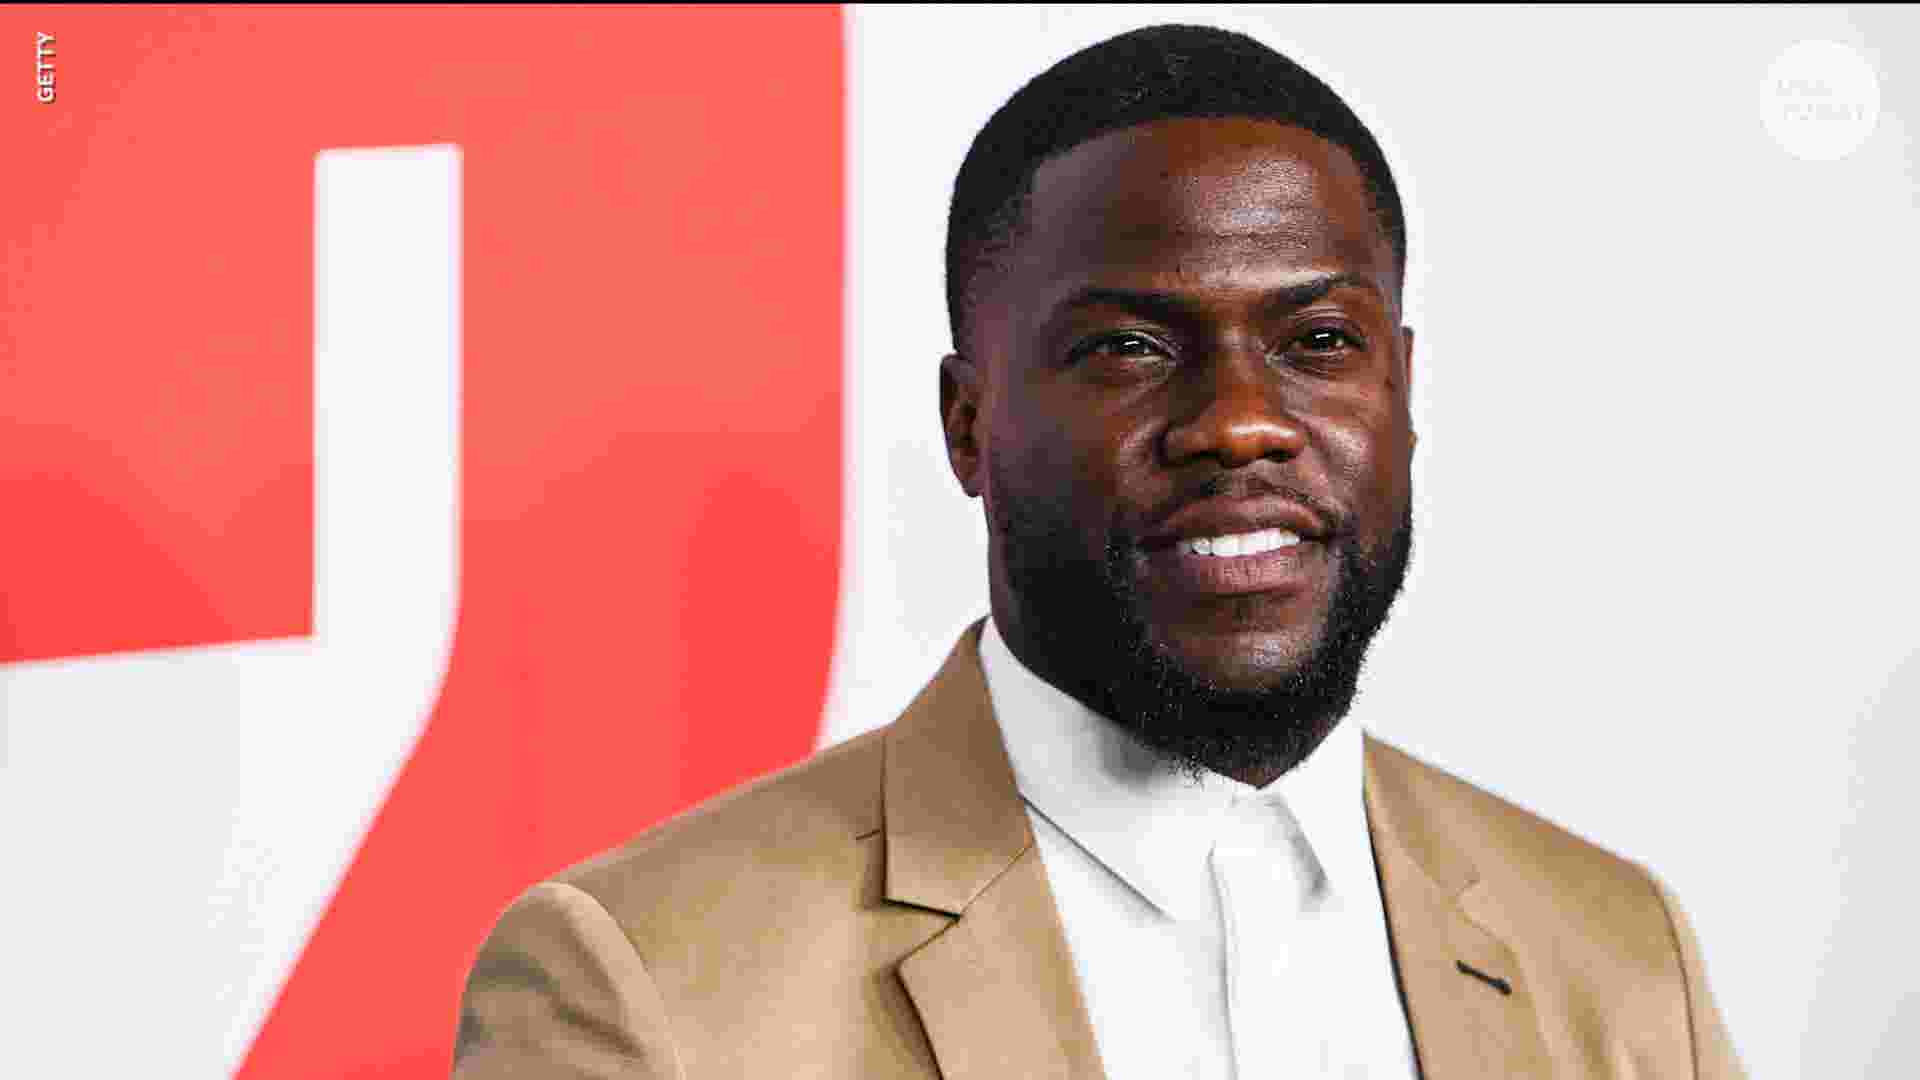 Model sues Kevin Hart for $60 million over 2017 sex tape